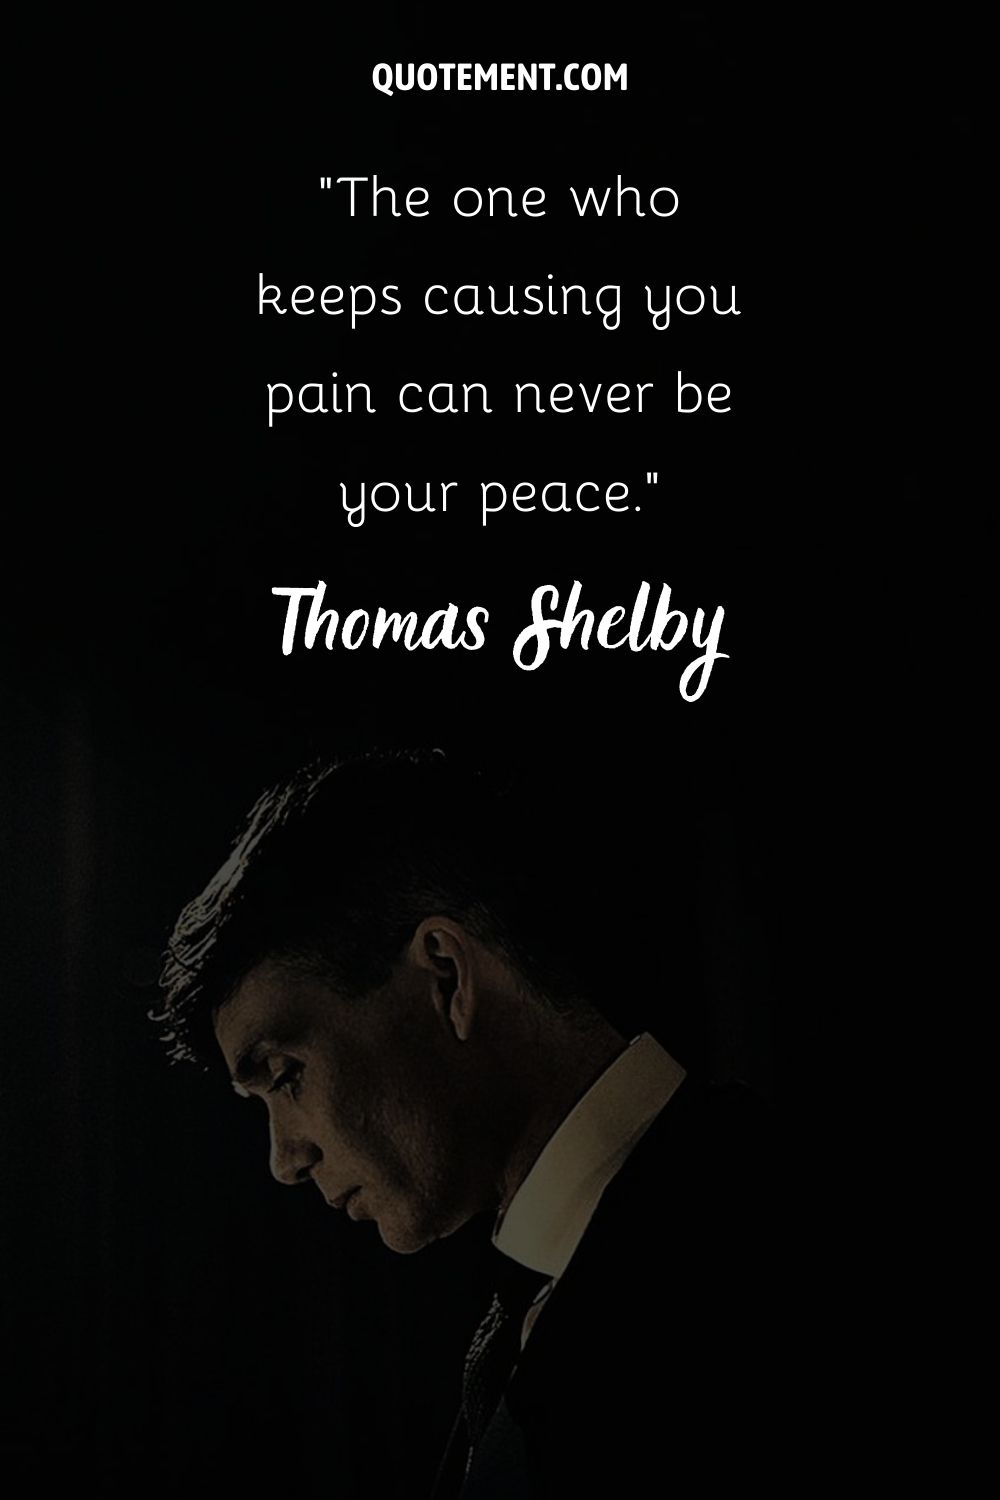 Cillian Murphy in a Peaky Blinder suit gazes downward representing thomas shelby quote about love
